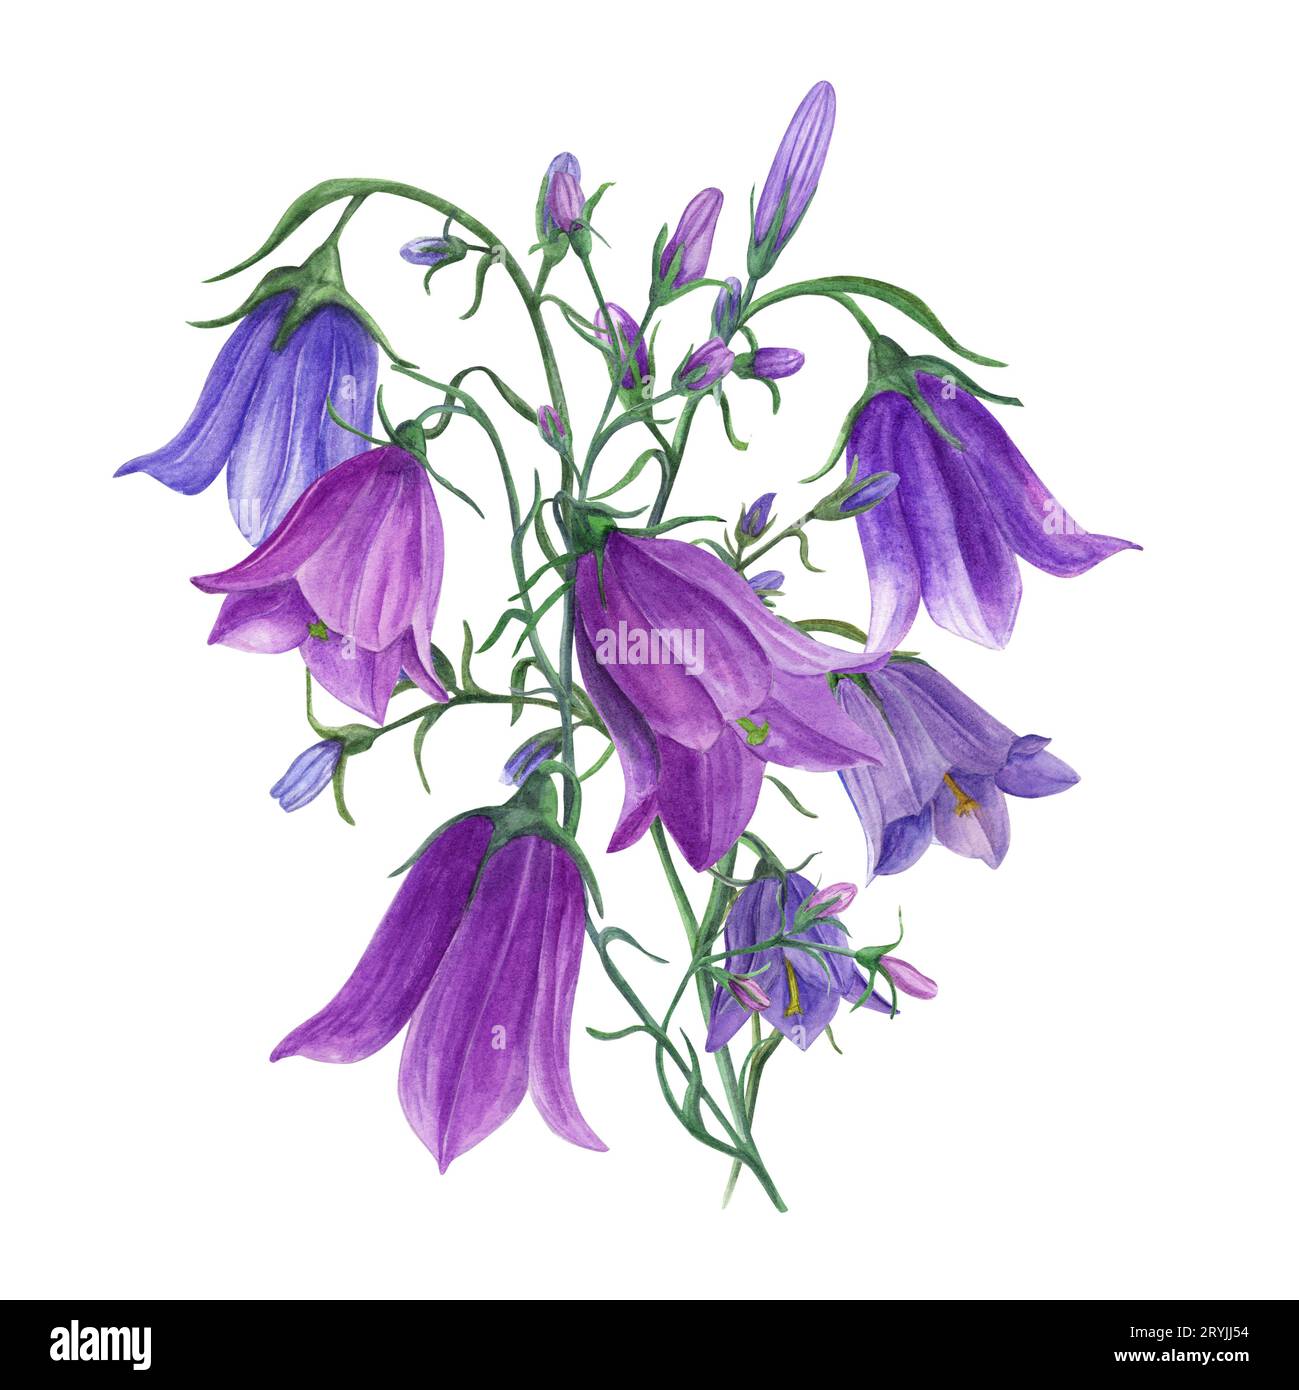 Bouquet of delicate blue lilac bells. Campanula flowers, meadow harebells. Watercolor illustration of wild plants on white. For wedding invitation Stock Photo